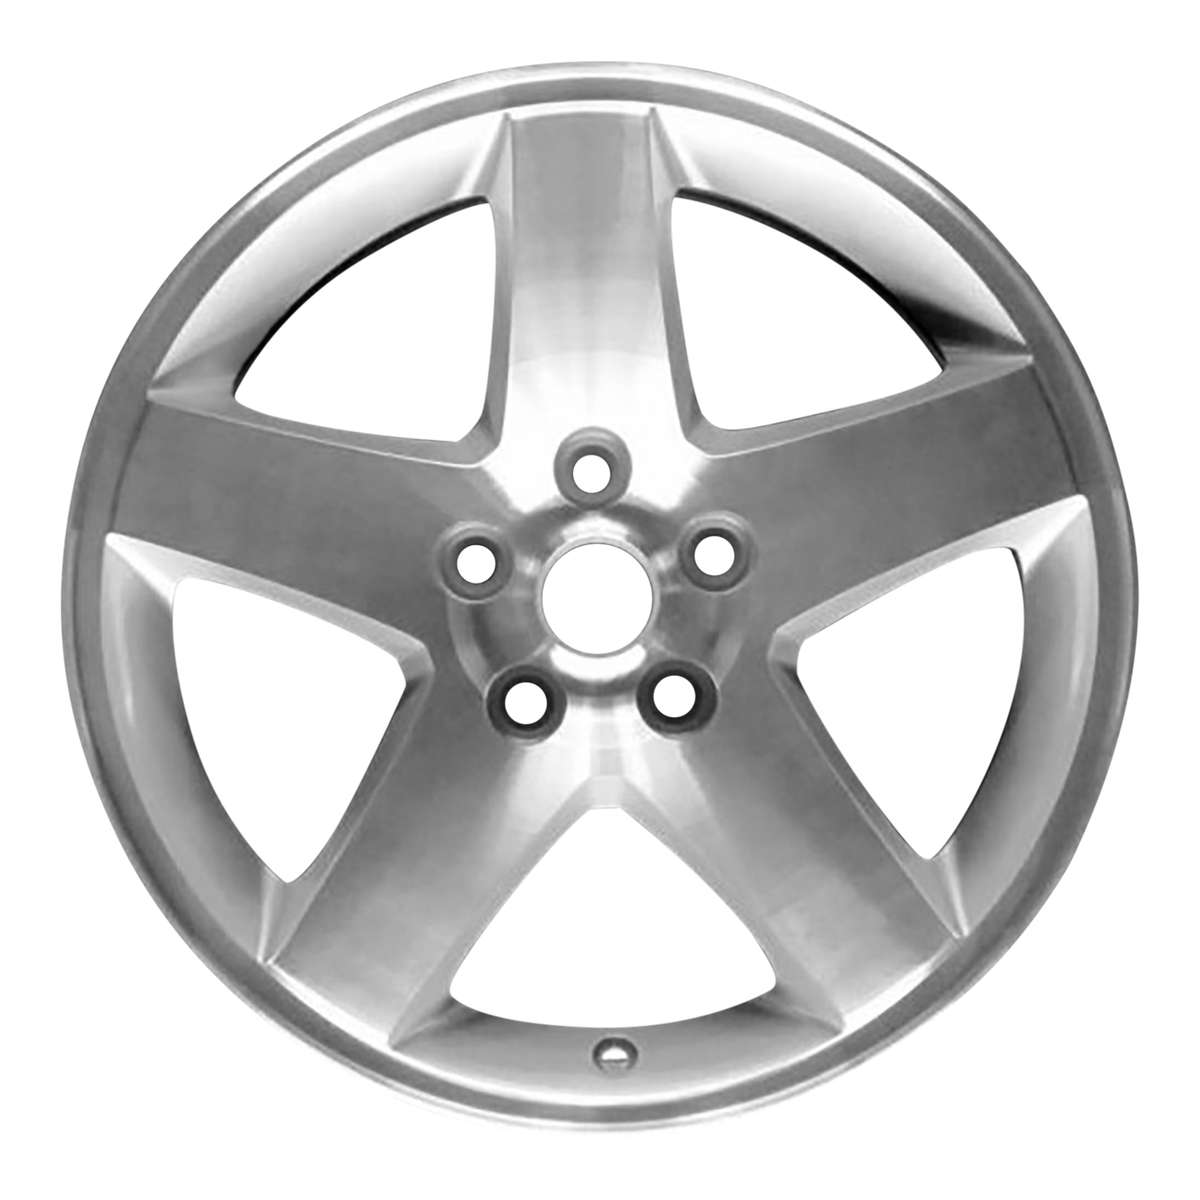 2009 Dodge Charger New 17" Replacement Wheel Rim RW2325MS